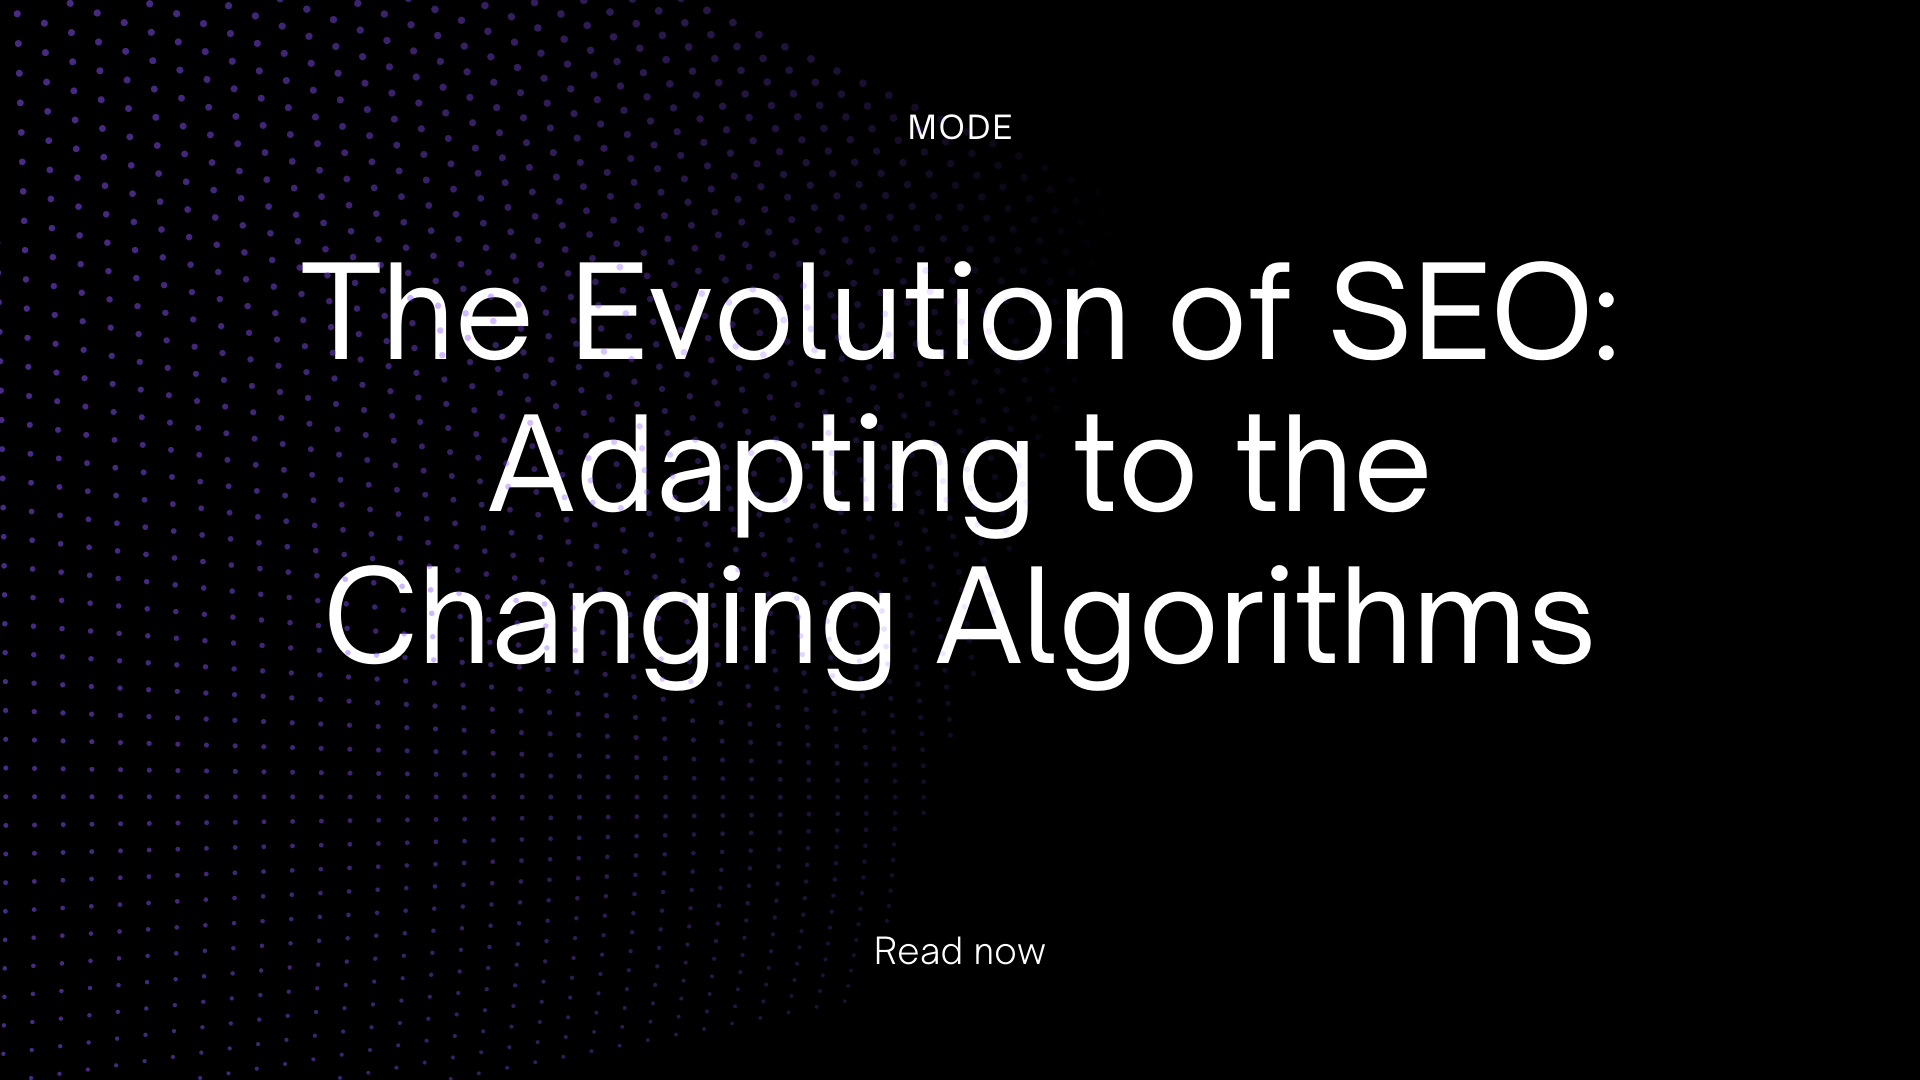 The Evolution of SEO: Adapting to the Changing Algorithms